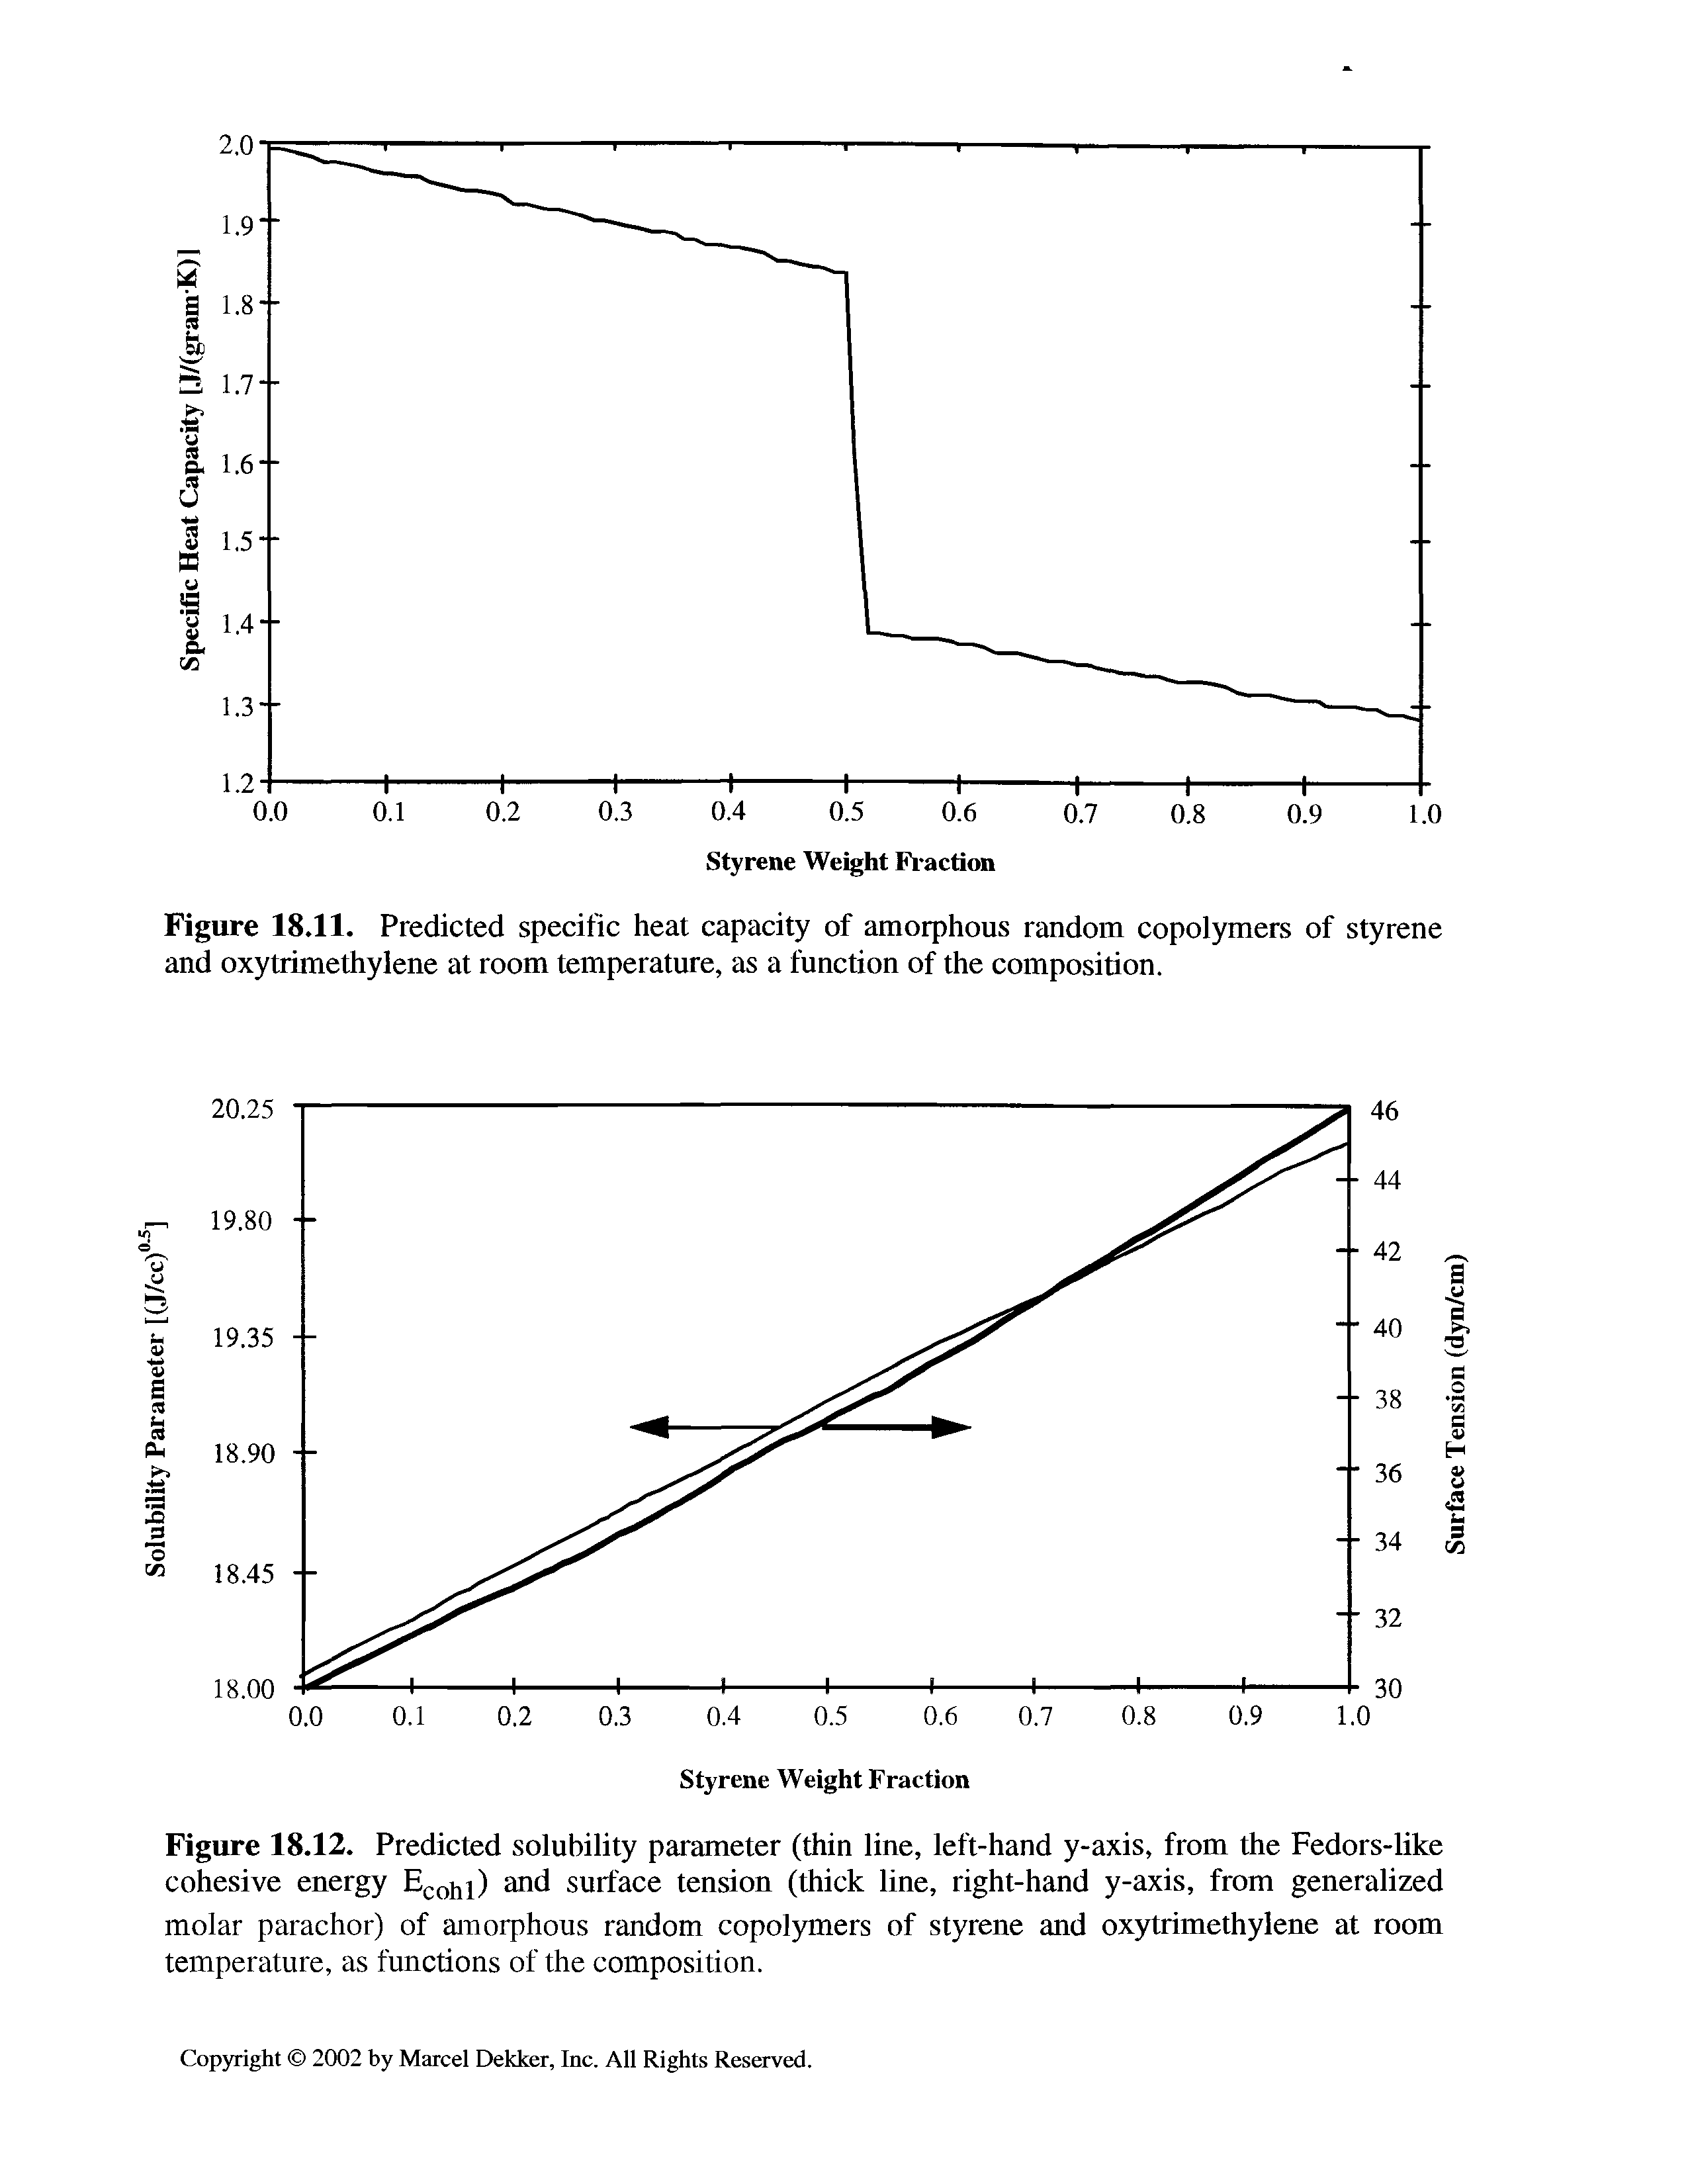 Figure 18.12. Predicted solubility parameter (thin line, left-hand y-axis, from the Fedors-like cohesive energy Ecohl) and surface tension (thick line, right-hand y-axis, from generalized molar parachor) of amorphous random copolymers of styrene and oxytrimethylene at room temperature, as functions of the composition.